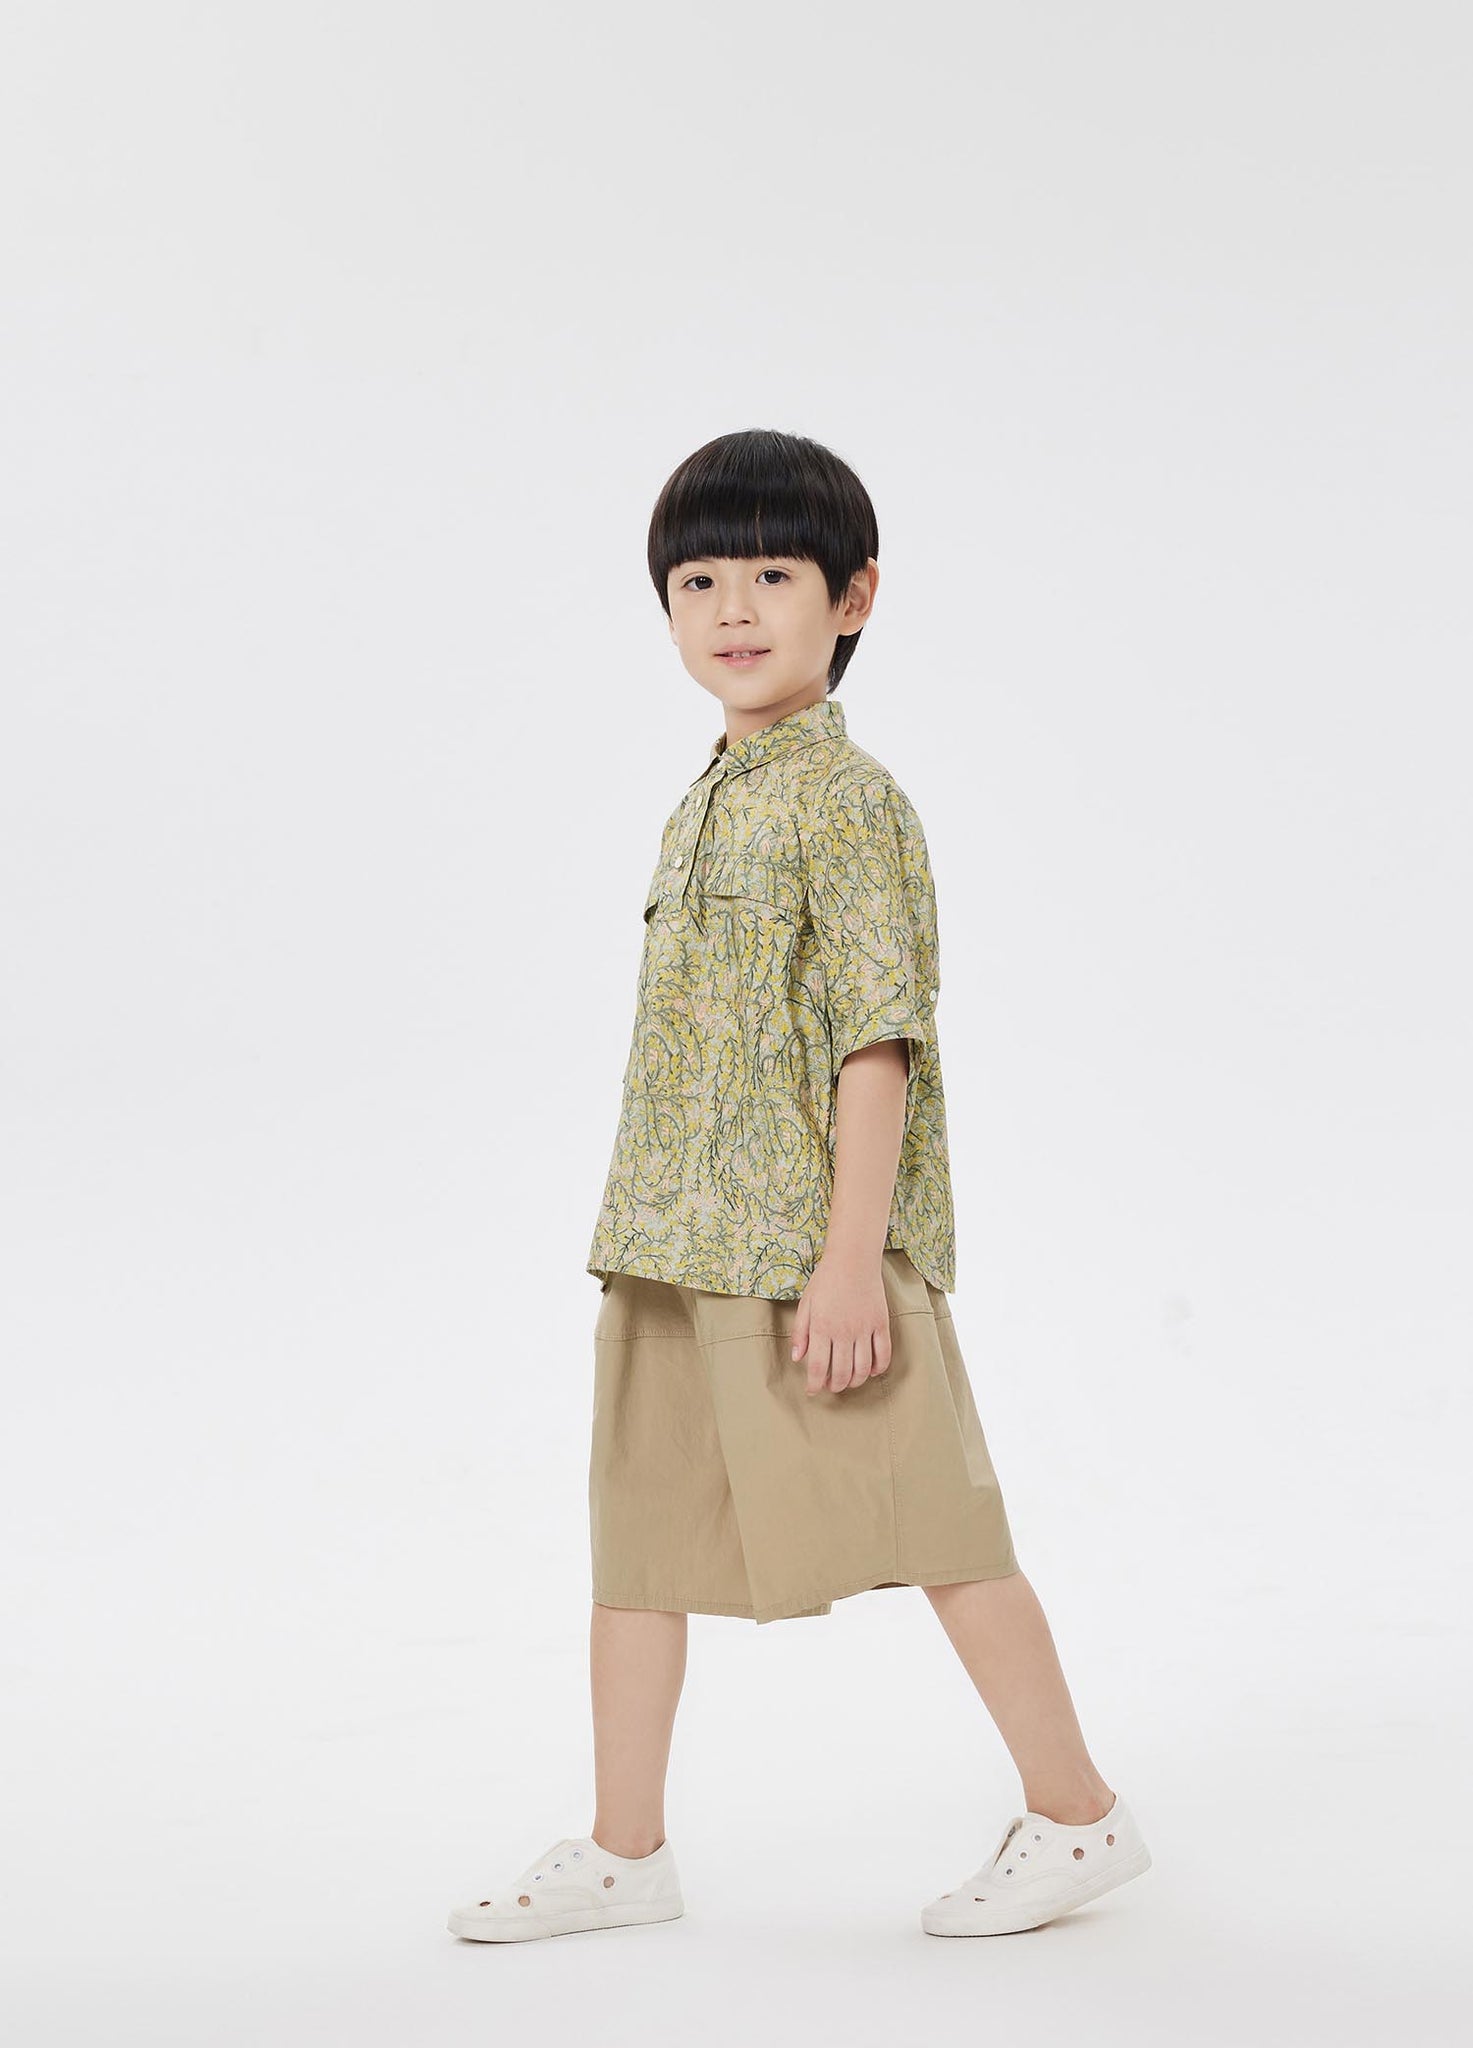 Shirt / jnby by JNBY Loose Fit Full Floral Print Short Sleeve Shirt